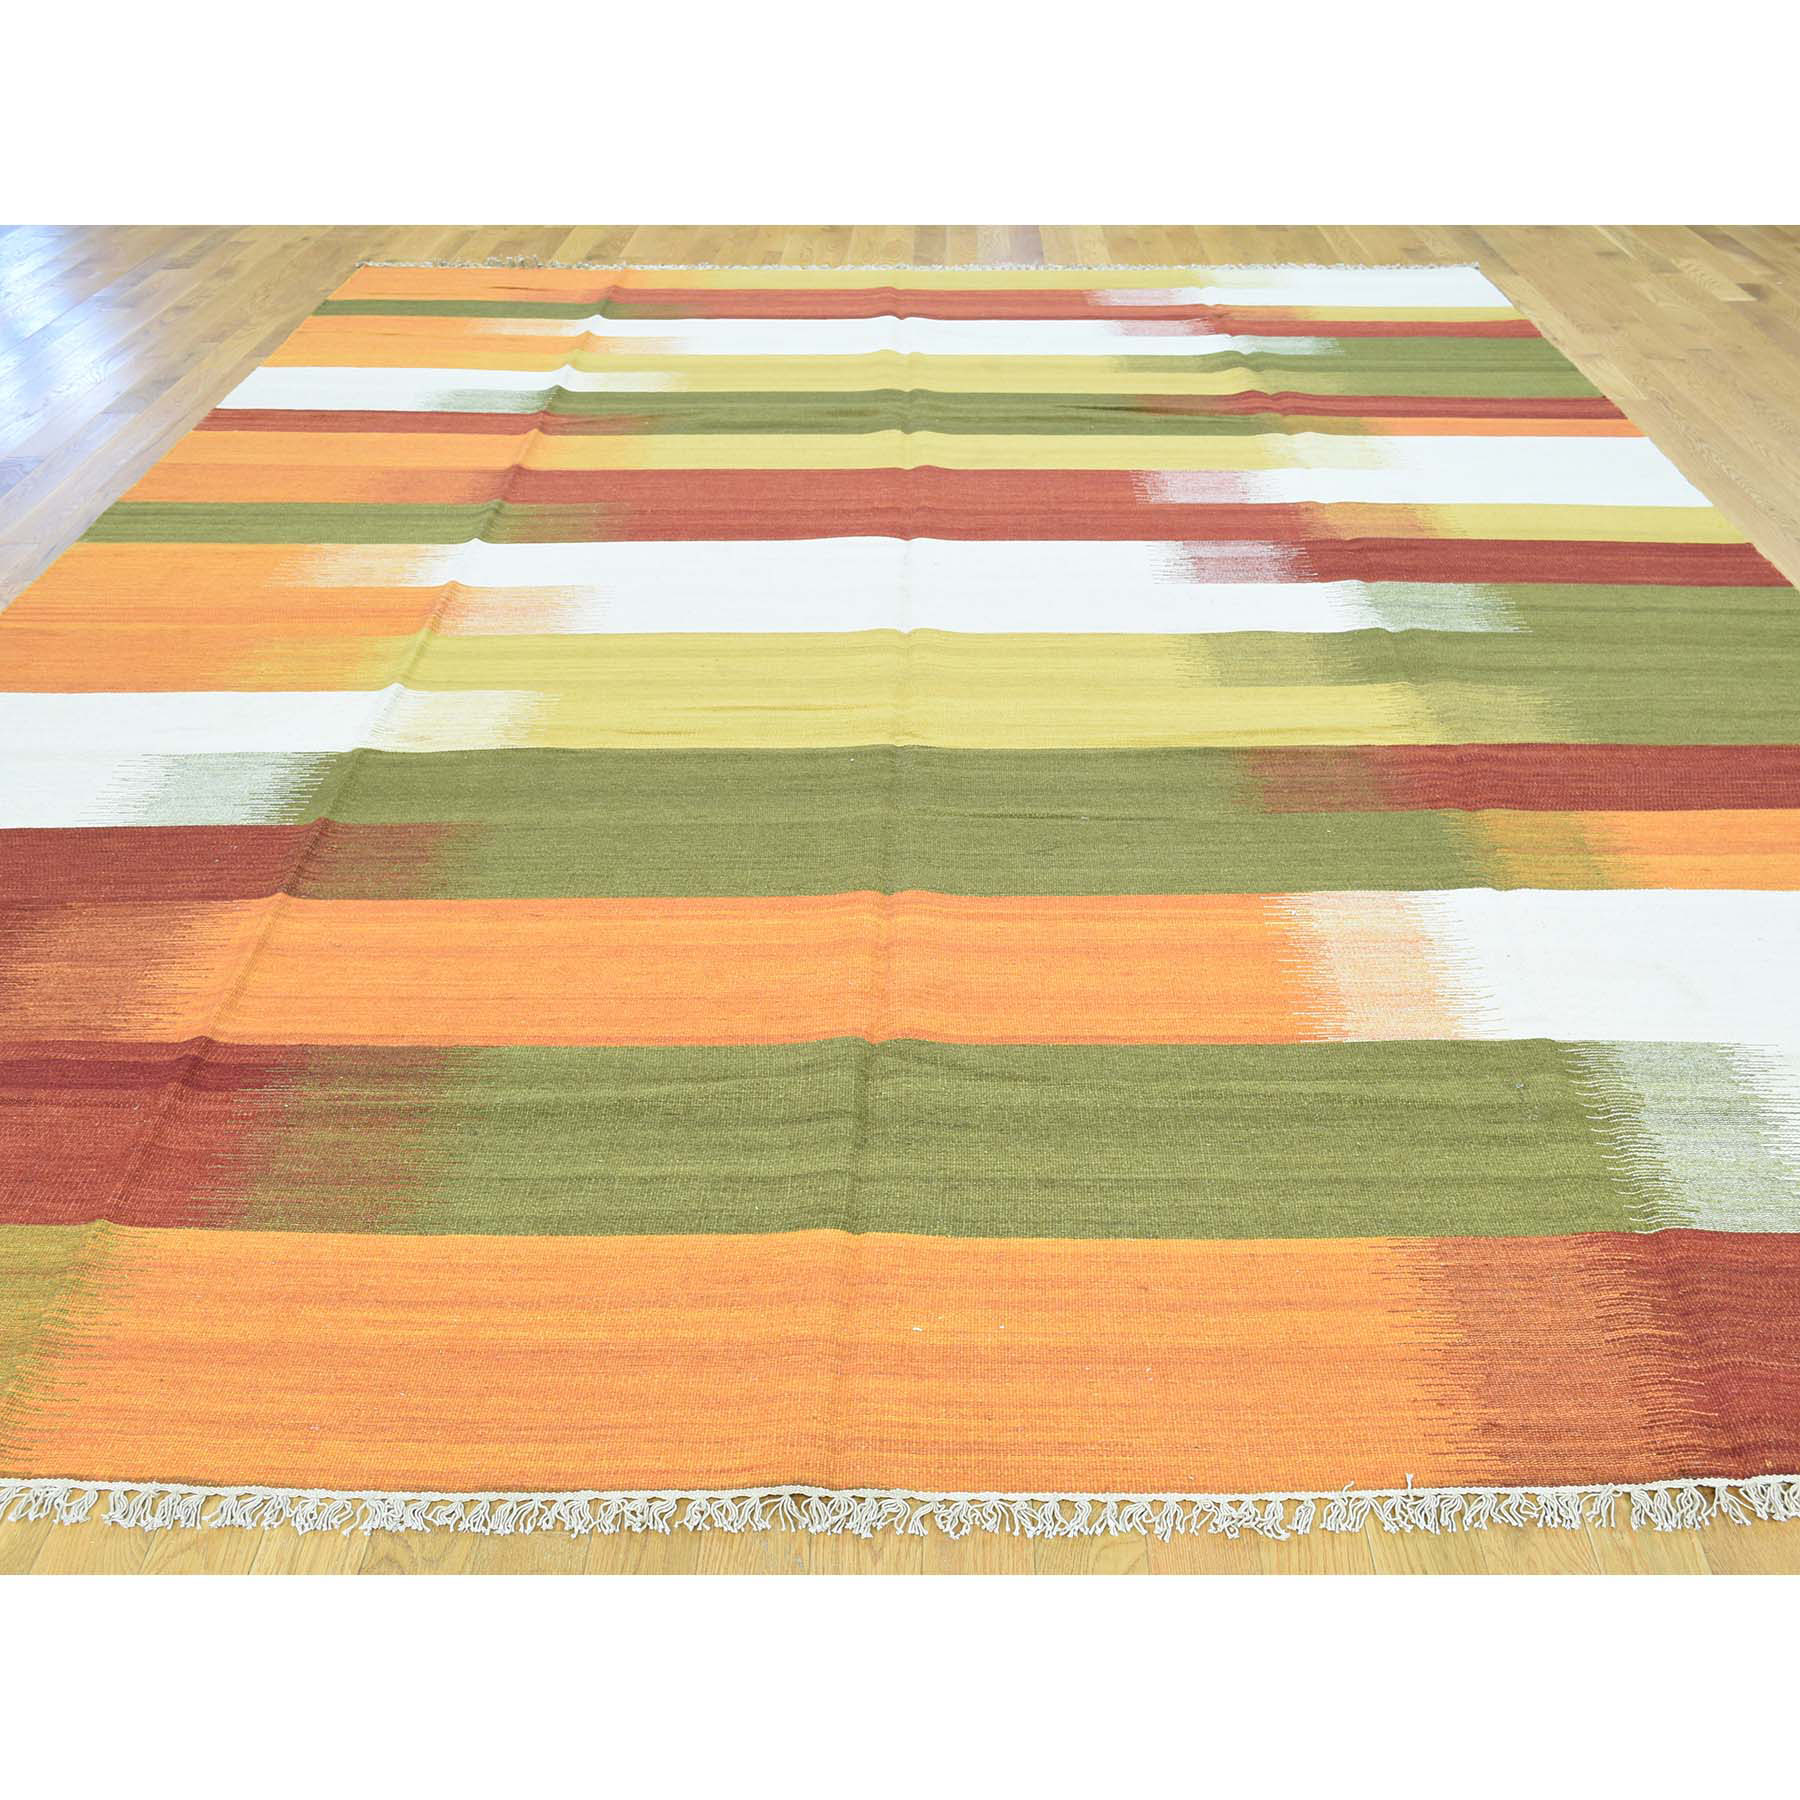 9-1 x12-6  Hand-Woven Durie Kilim Pure Wool Flat Weave Colorful Rug 